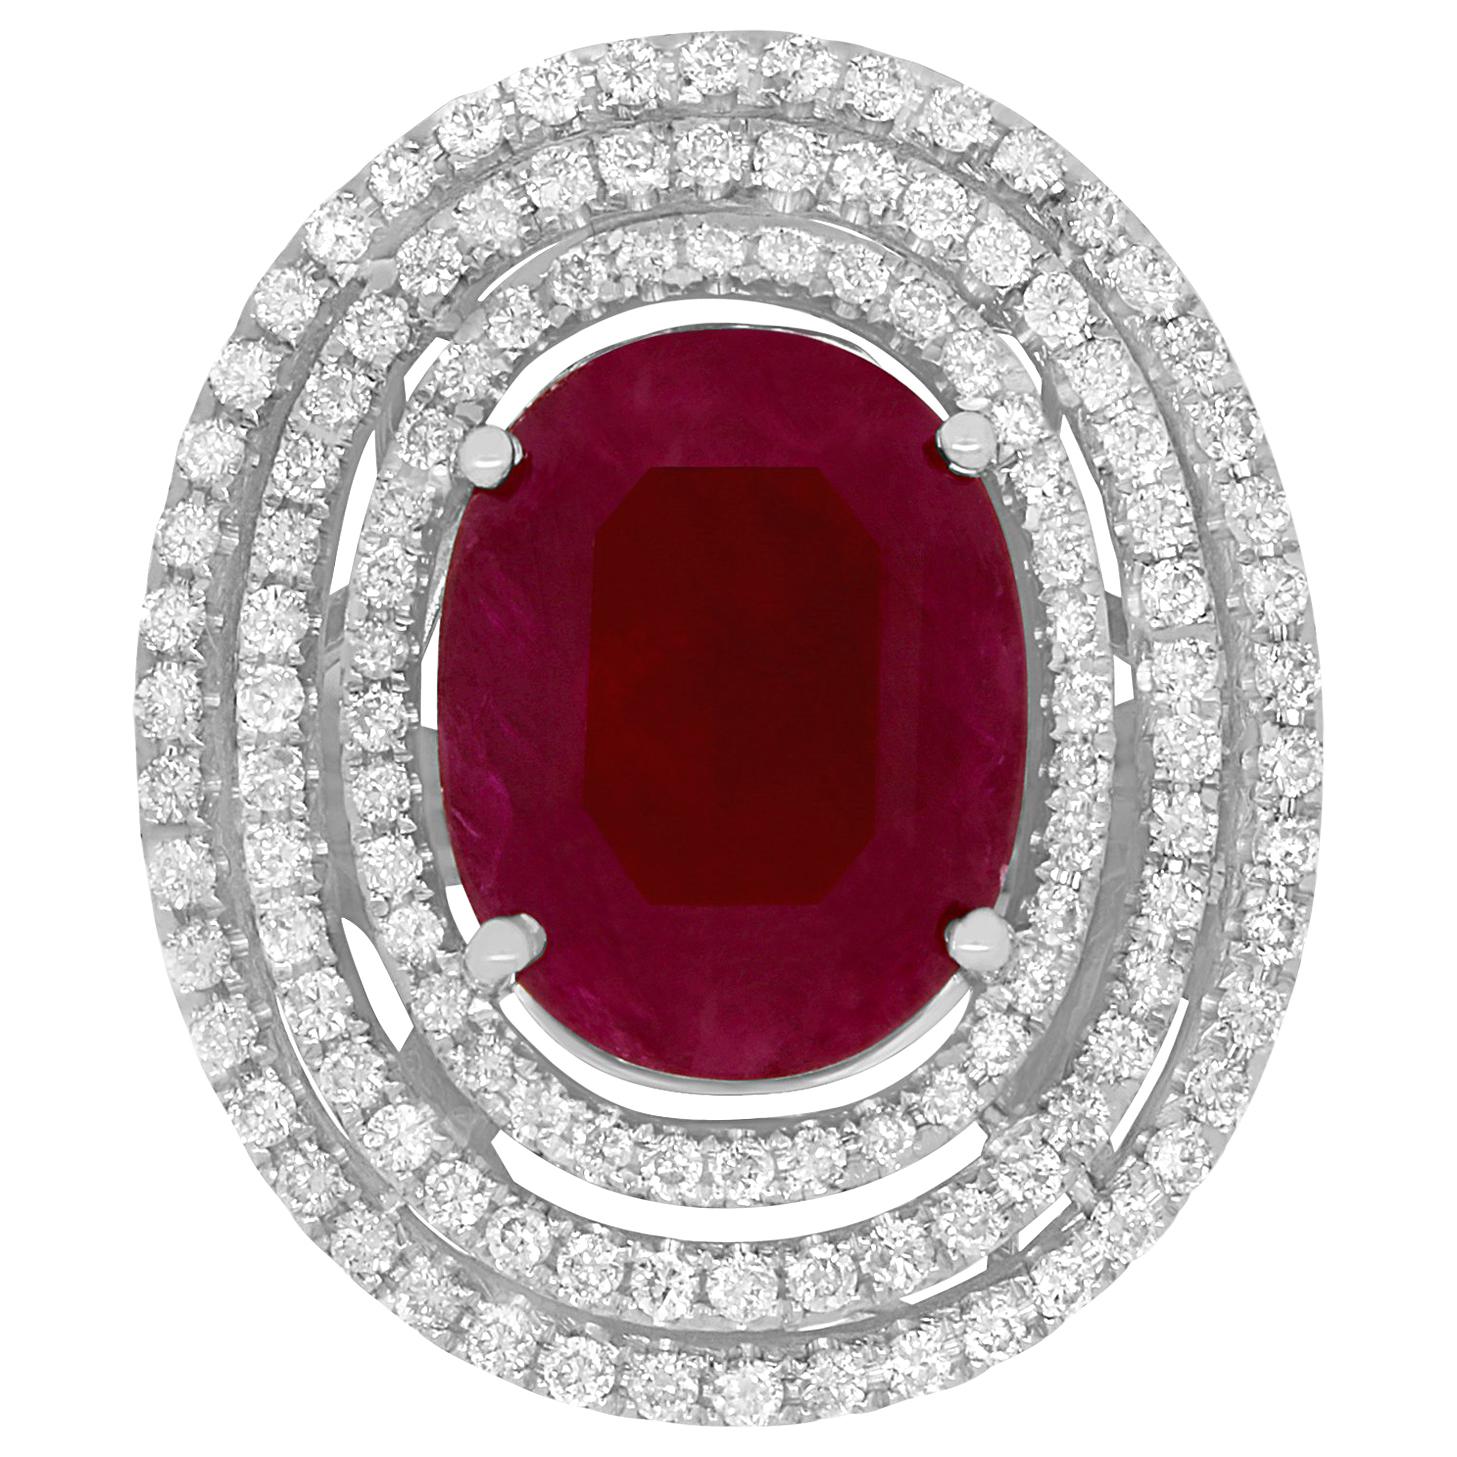 7.06 Carat Oval Ruby and 2.25 Carat White Diamond Ring